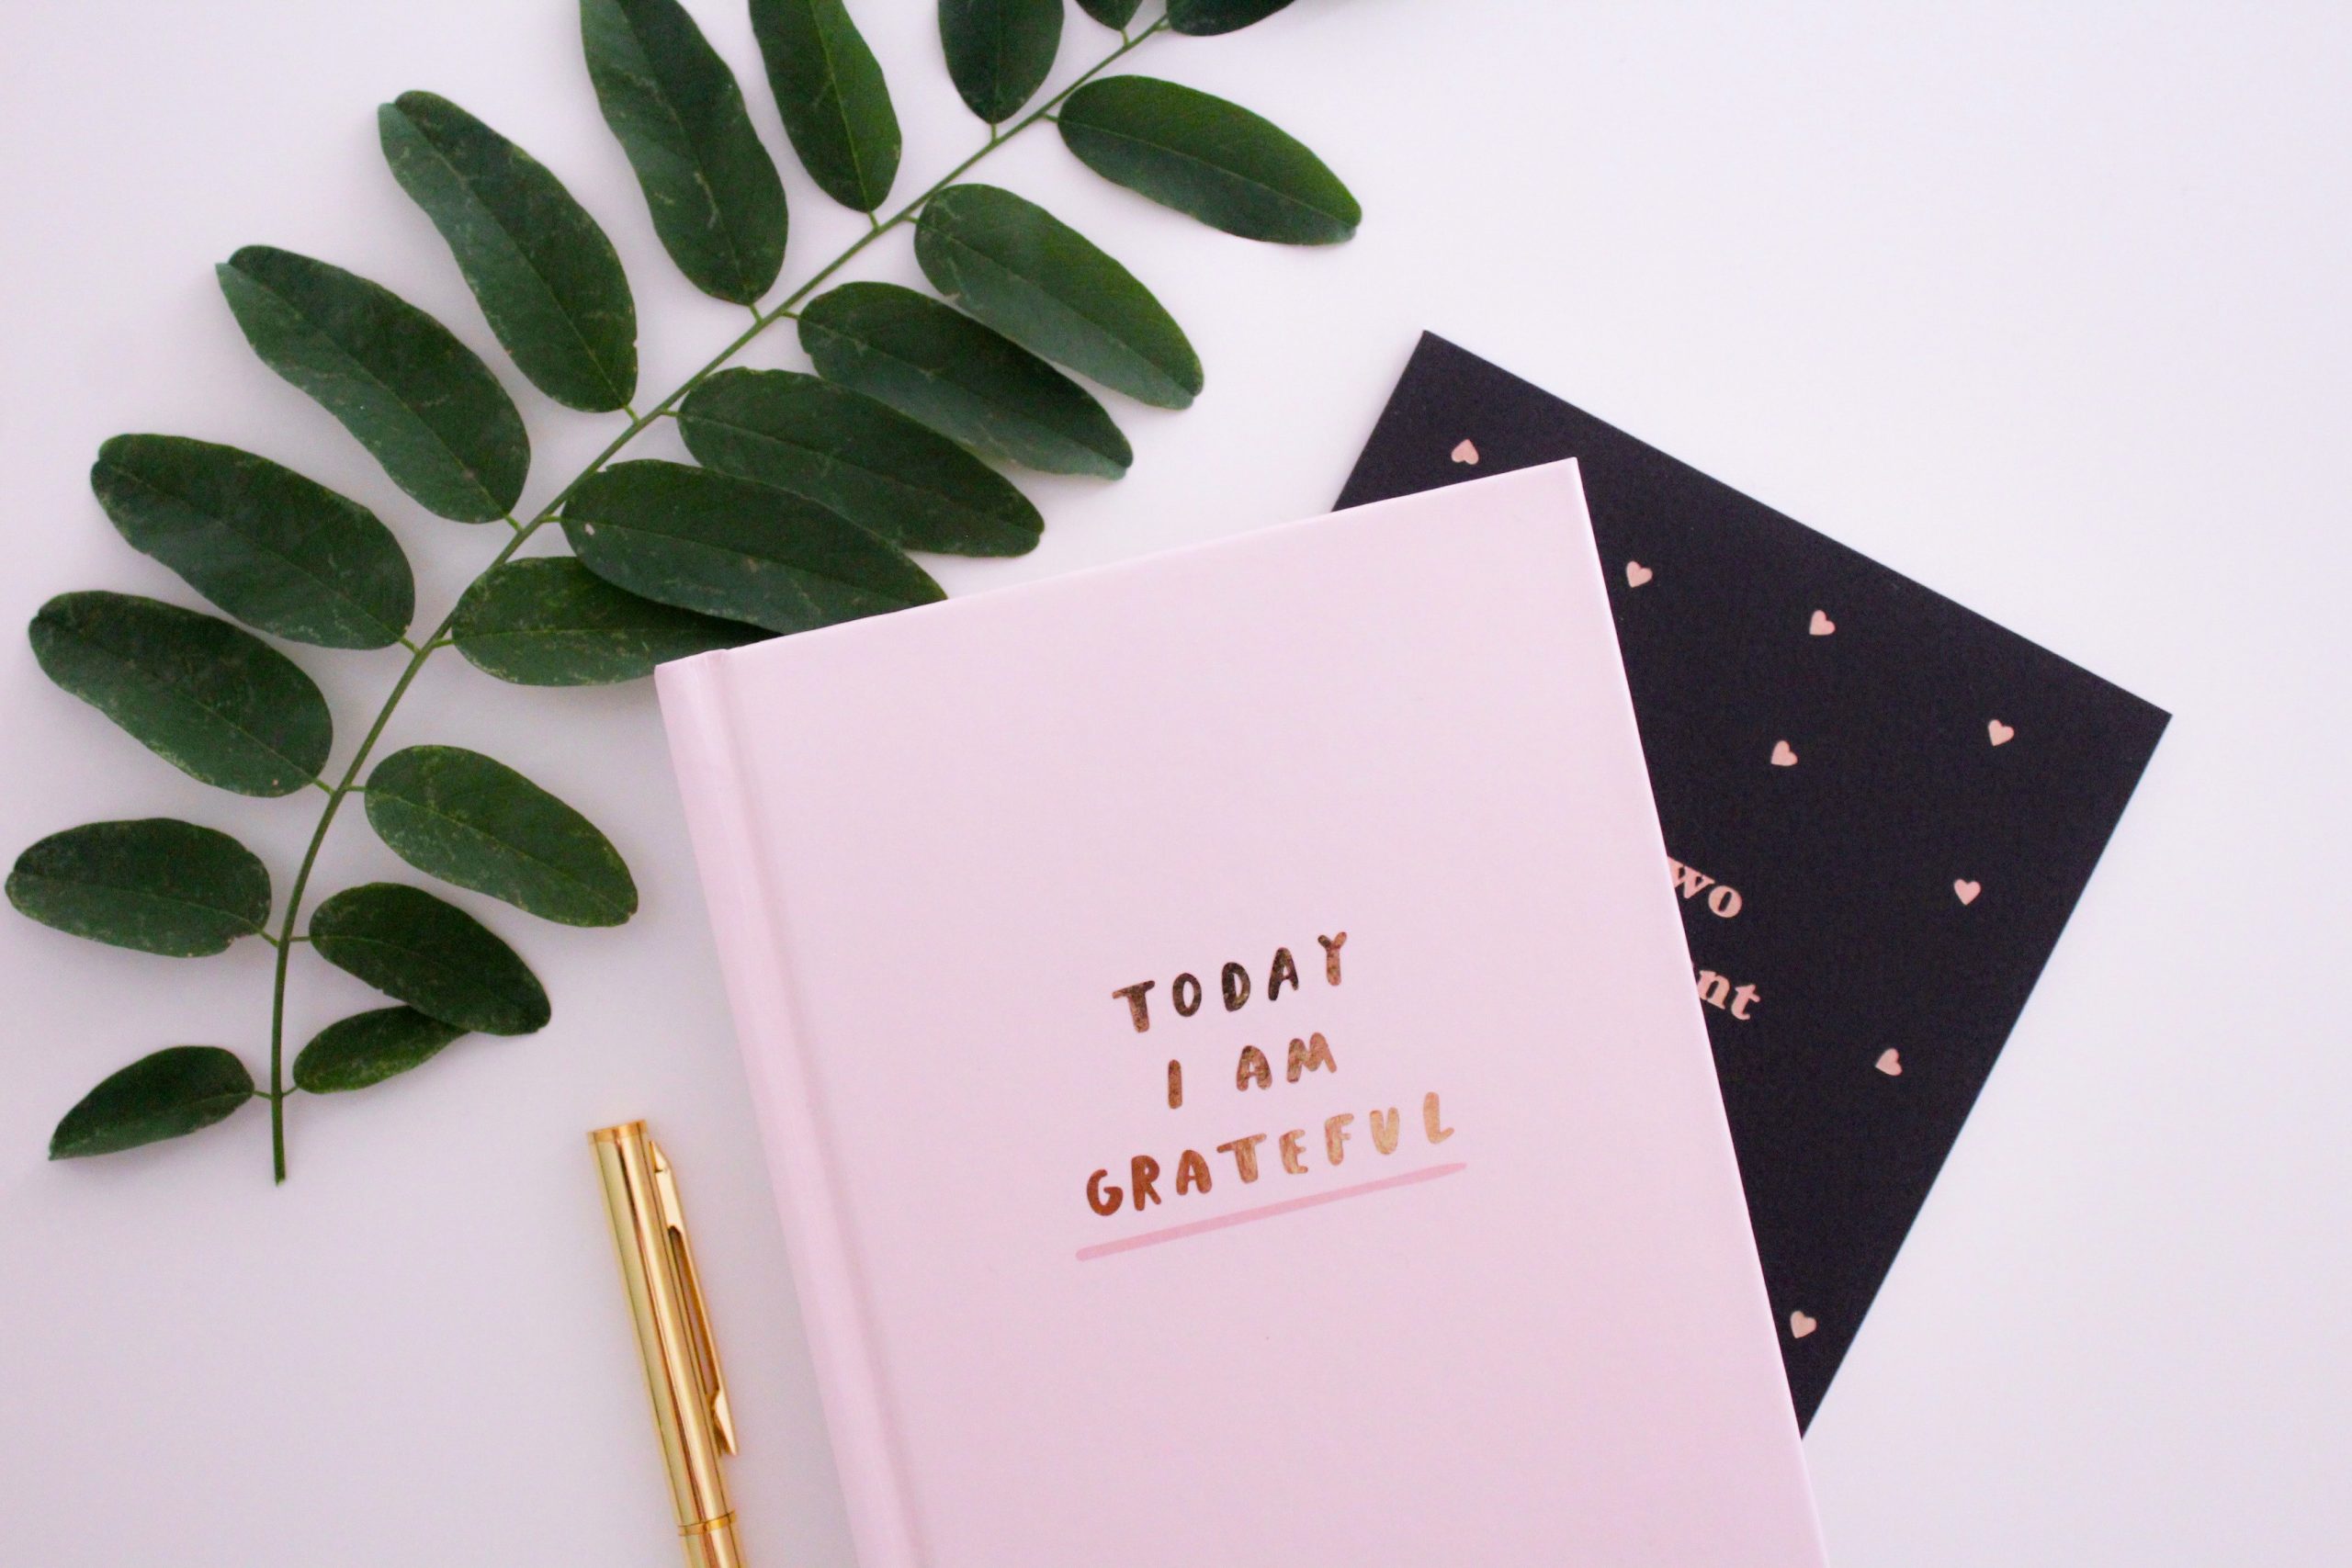 Incorporating Gratitude Into Your Daily Routine    Small Habits, Big Impact